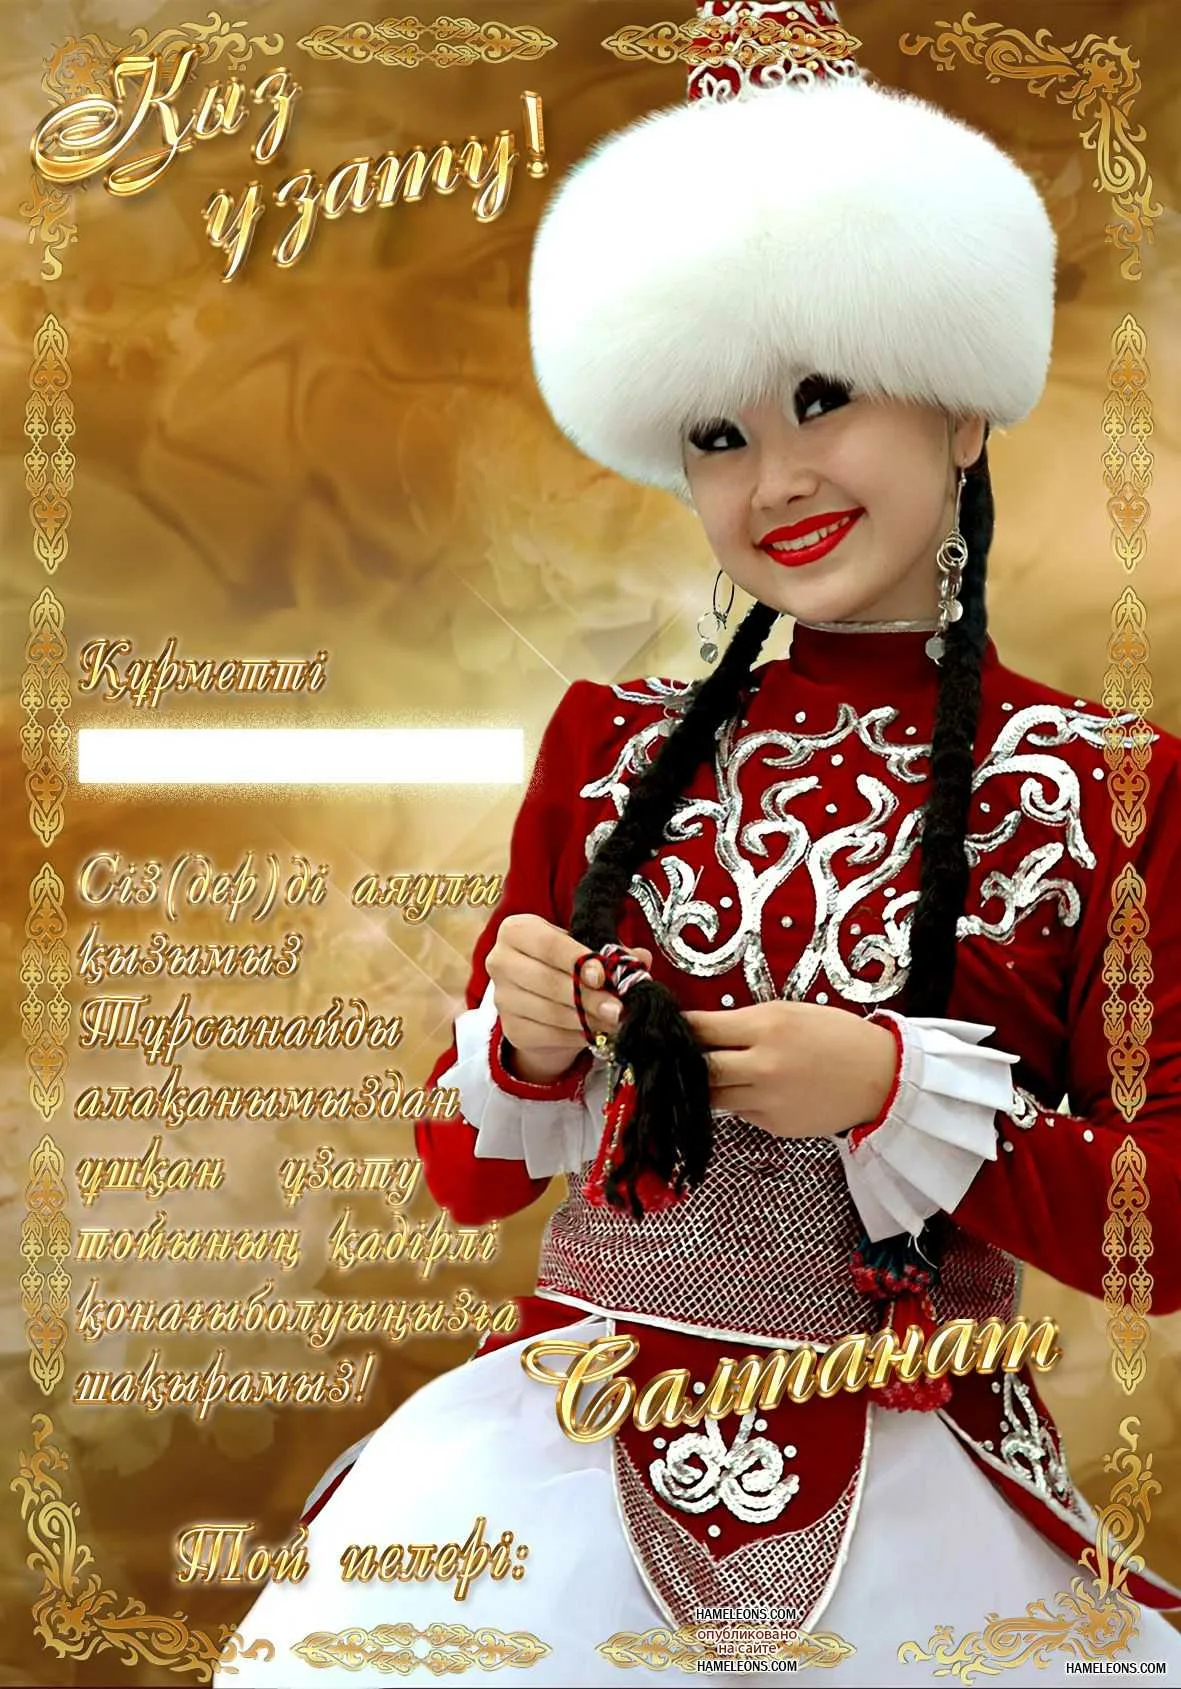 Фото Happy New Year greetings in Kazakh with translation into Russian #6